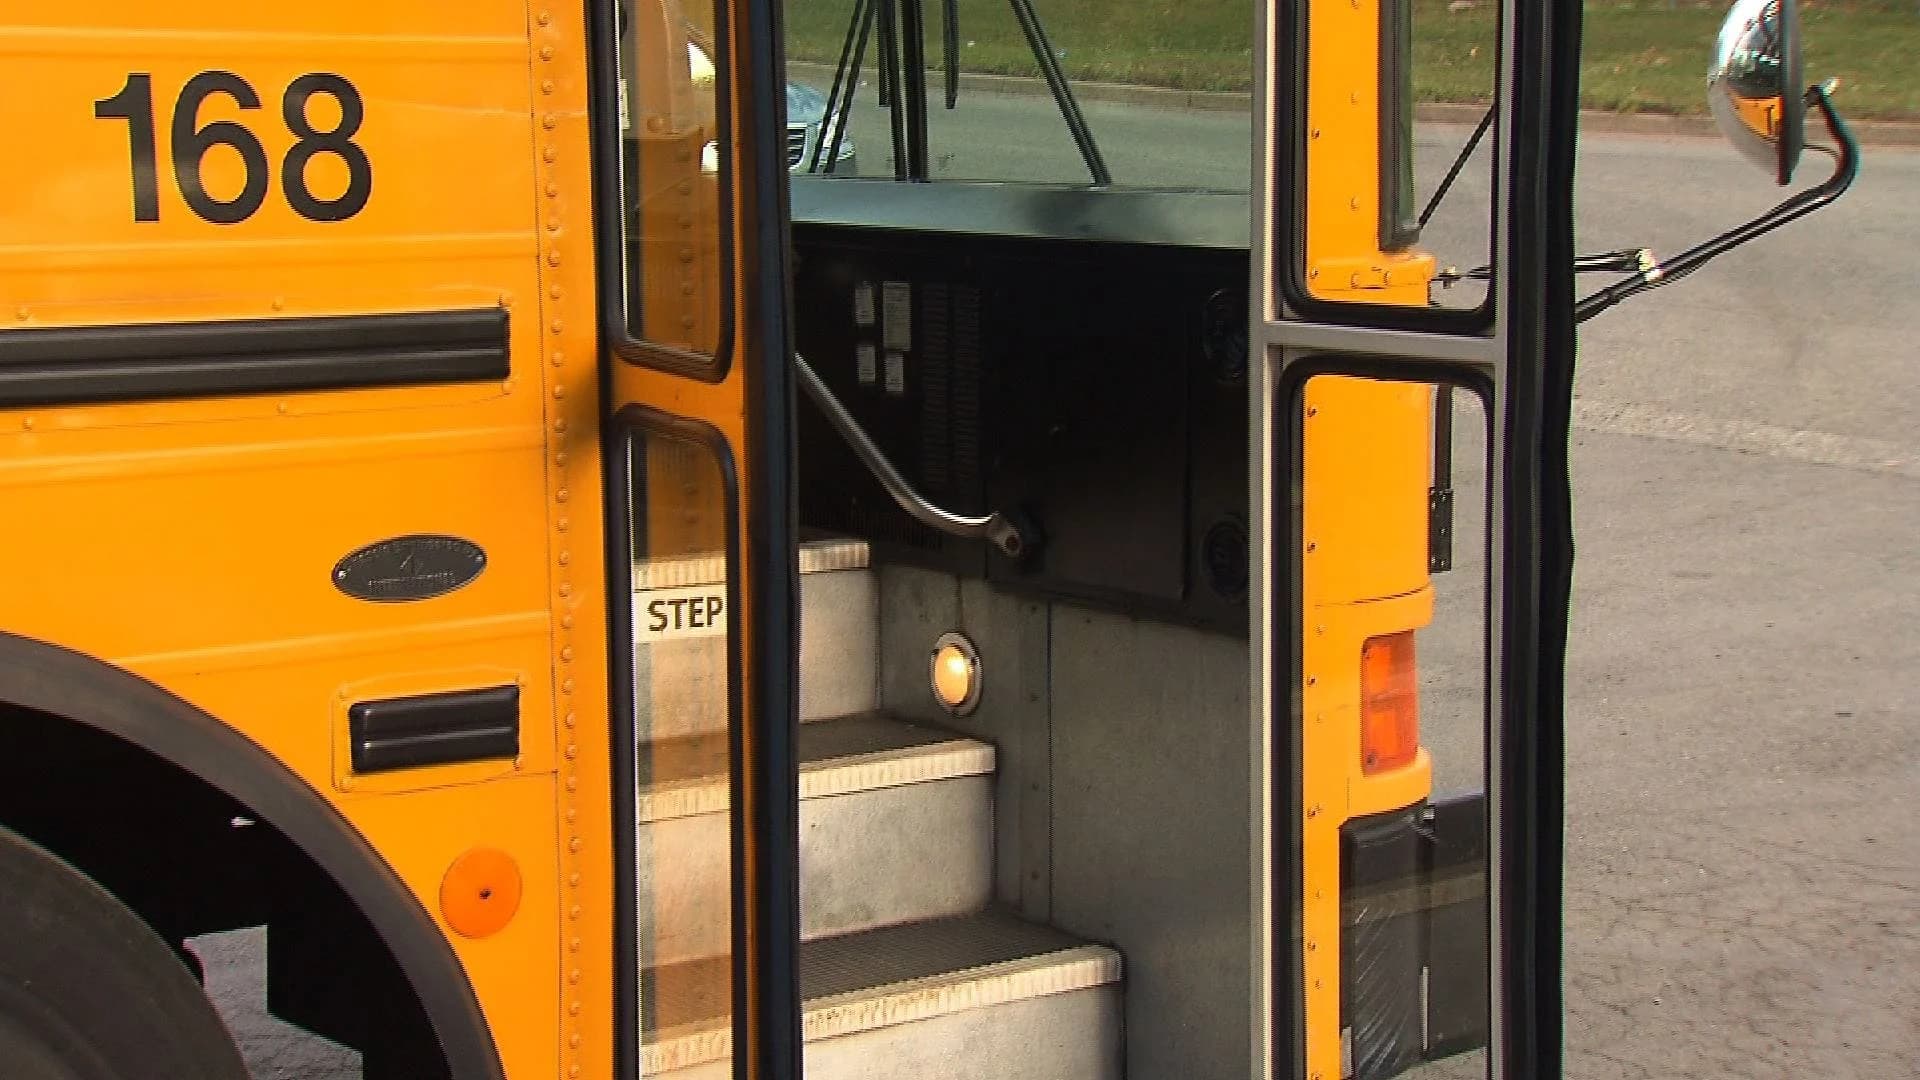 Police: NJ teen steals school bus, crashes into parked car